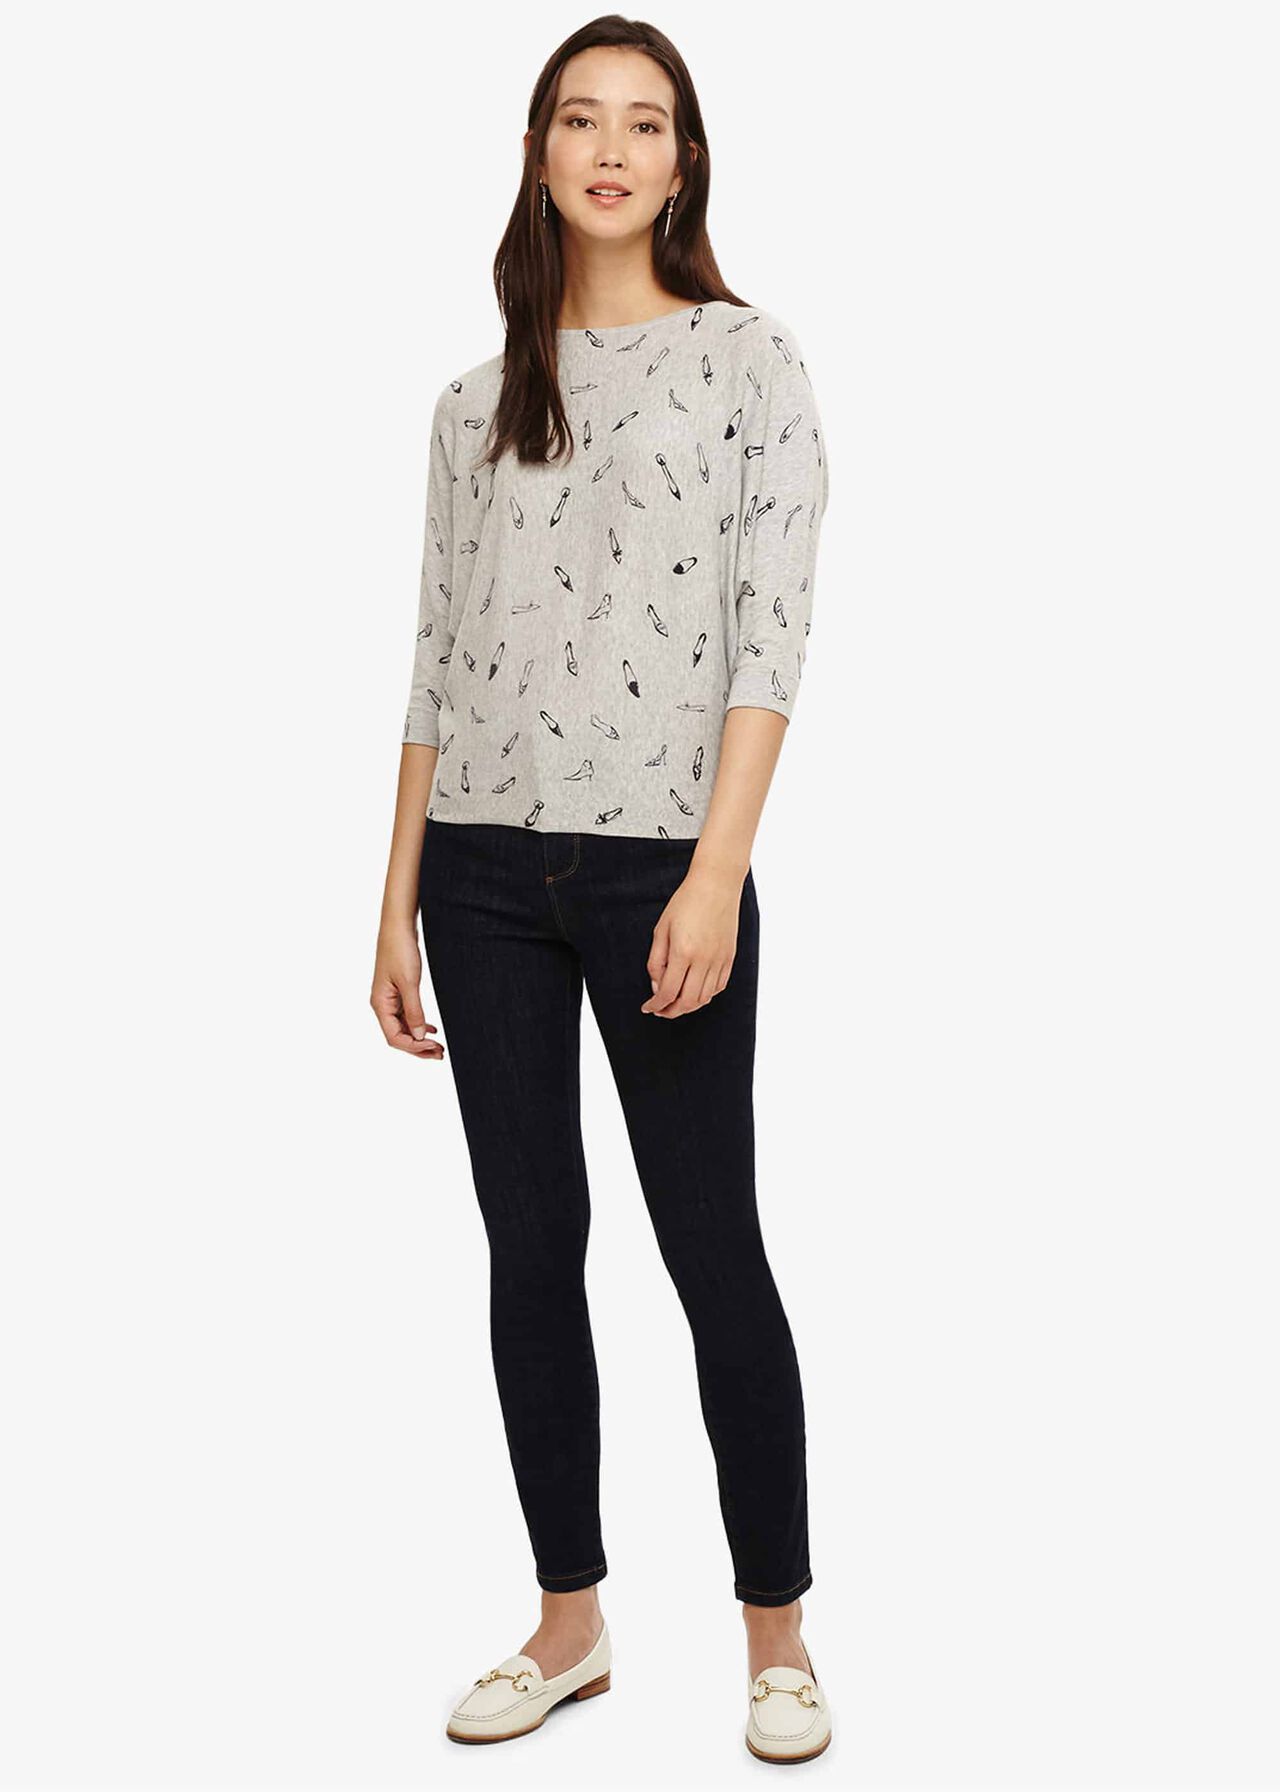 Christa Shoe Print Knitted Top